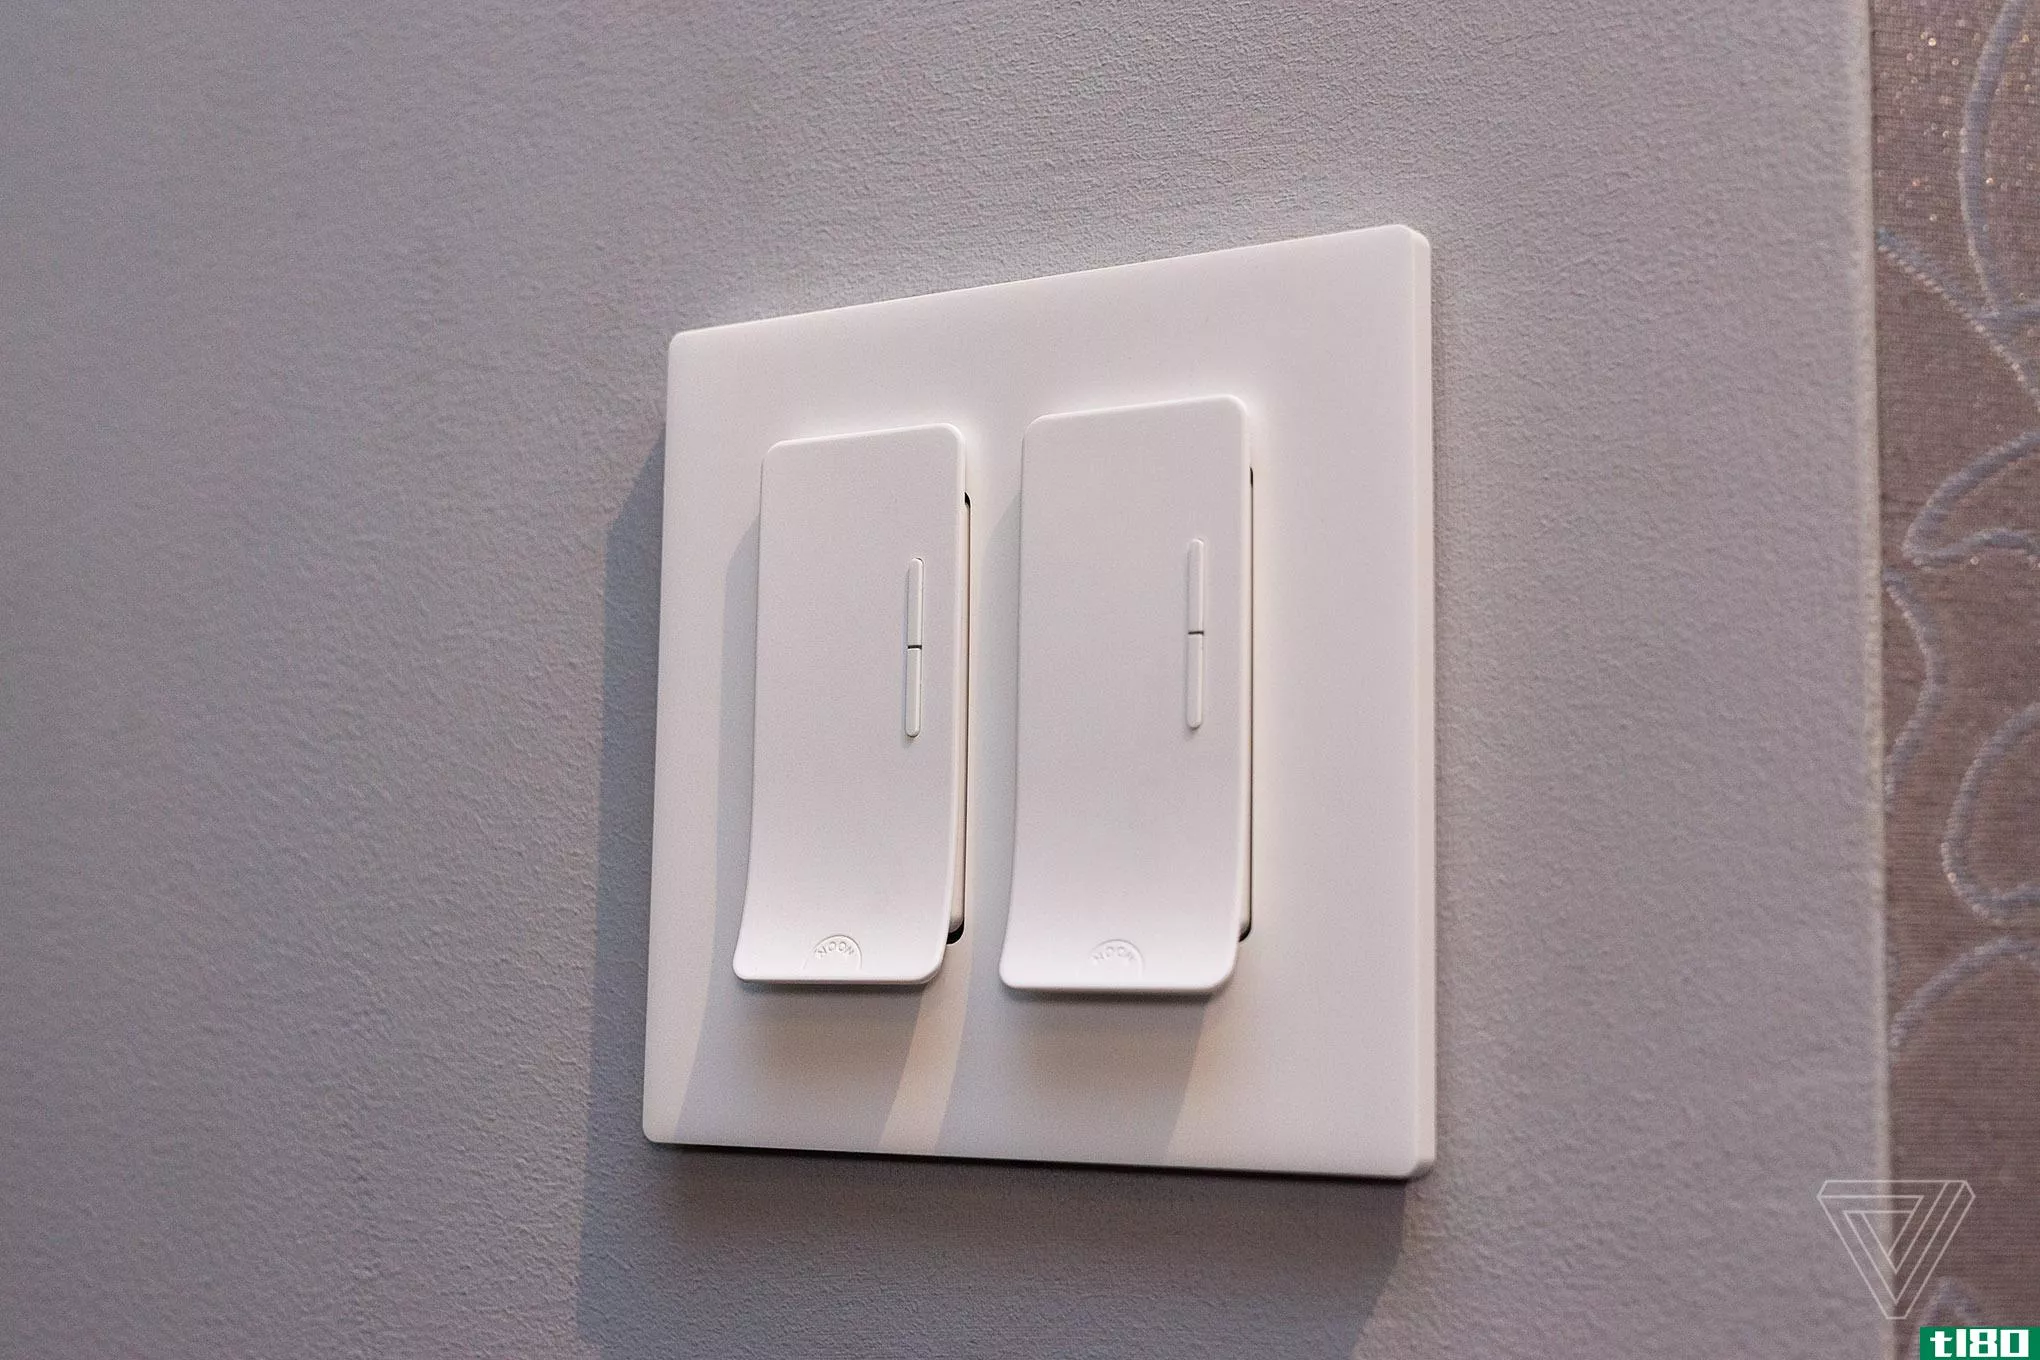 Noon extension switches